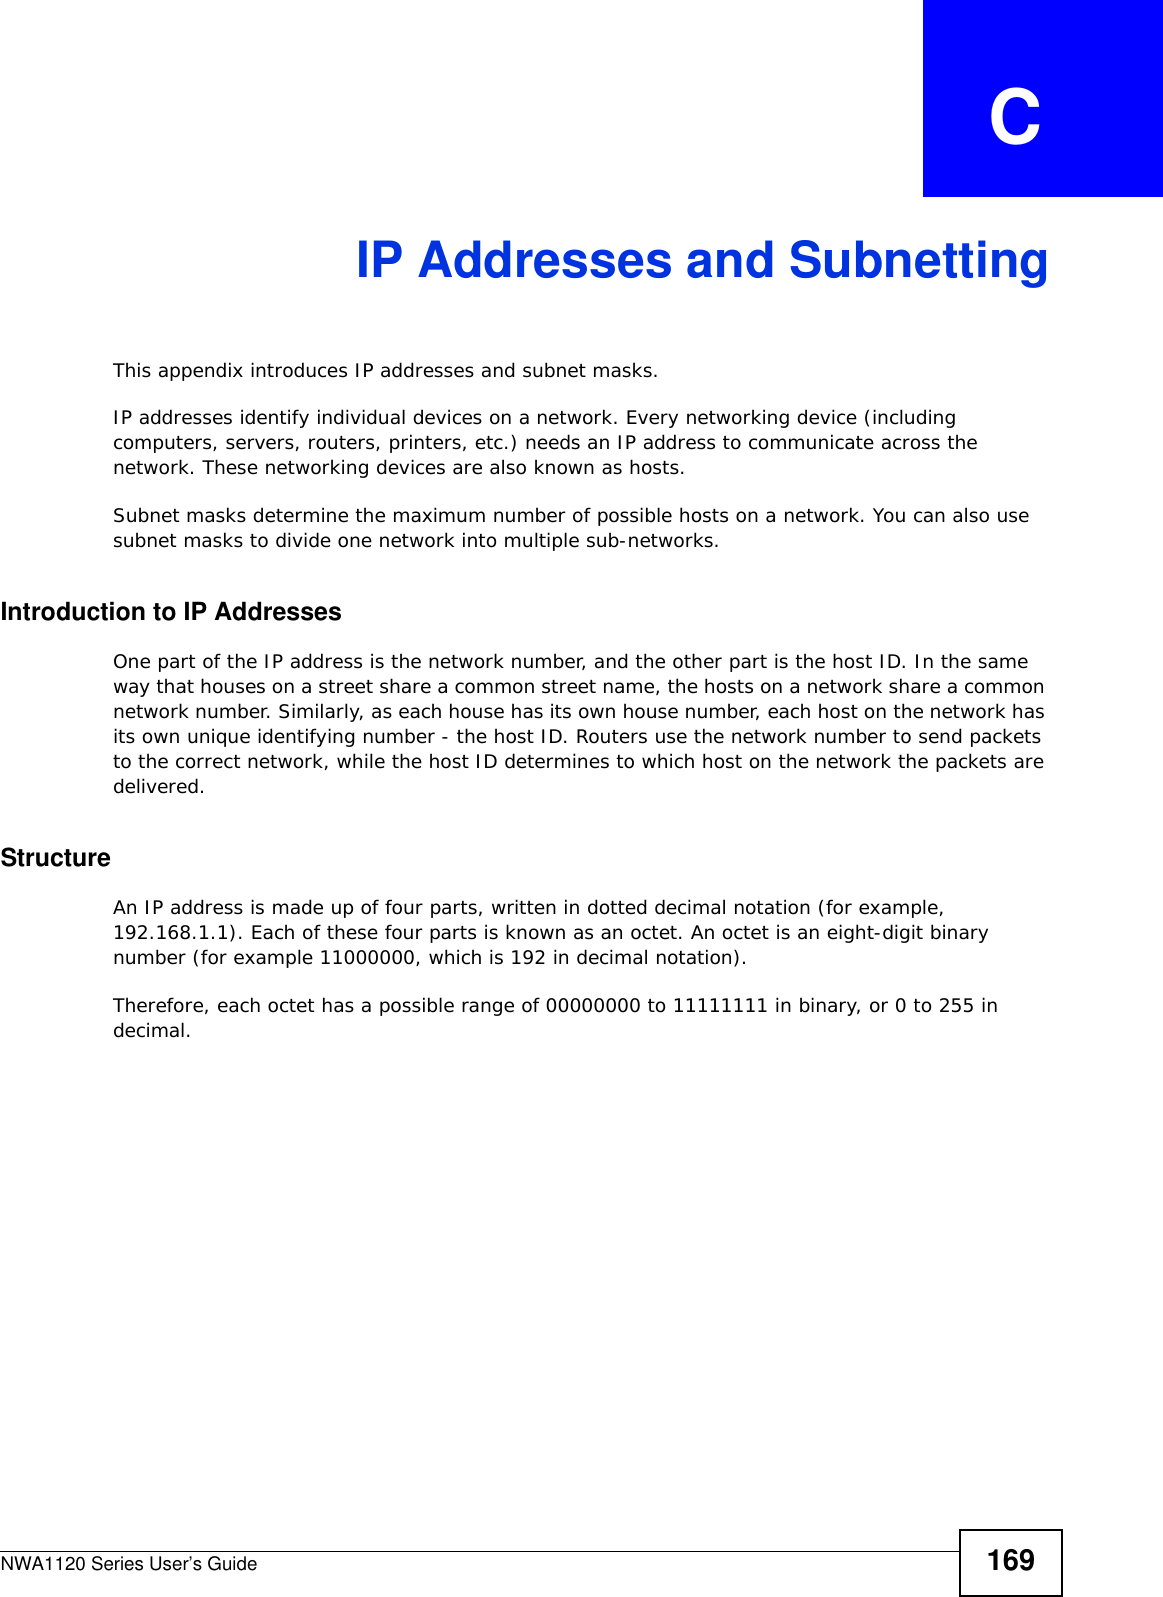 NWA1120 Series User’s Guide 169APPENDIX   CIP Addresses and SubnettingThis appendix introduces IP addresses and subnet masks. IP addresses identify individual devices on a network. Every networking device (including computers, servers, routers, printers, etc.) needs an IP address to communicate across the network. These networking devices are also known as hosts.Subnet masks determine the maximum number of possible hosts on a network. You can also use subnet masks to divide one network into multiple sub-networks.Introduction to IP AddressesOne part of the IP address is the network number, and the other part is the host ID. In the same way that houses on a street share a common street name, the hosts on a network share a common network number. Similarly, as each house has its own house number, each host on the network has its own unique identifying number - the host ID. Routers use the network number to send packets to the correct network, while the host ID determines to which host on the network the packets are delivered.StructureAn IP address is made up of four parts, written in dotted decimal notation (for example, 192.168.1.1). Each of these four parts is known as an octet. An octet is an eight-digit binary number (for example 11000000, which is 192 in decimal notation). Therefore, each octet has a possible range of 00000000 to 11111111 in binary, or 0 to 255 in decimal.